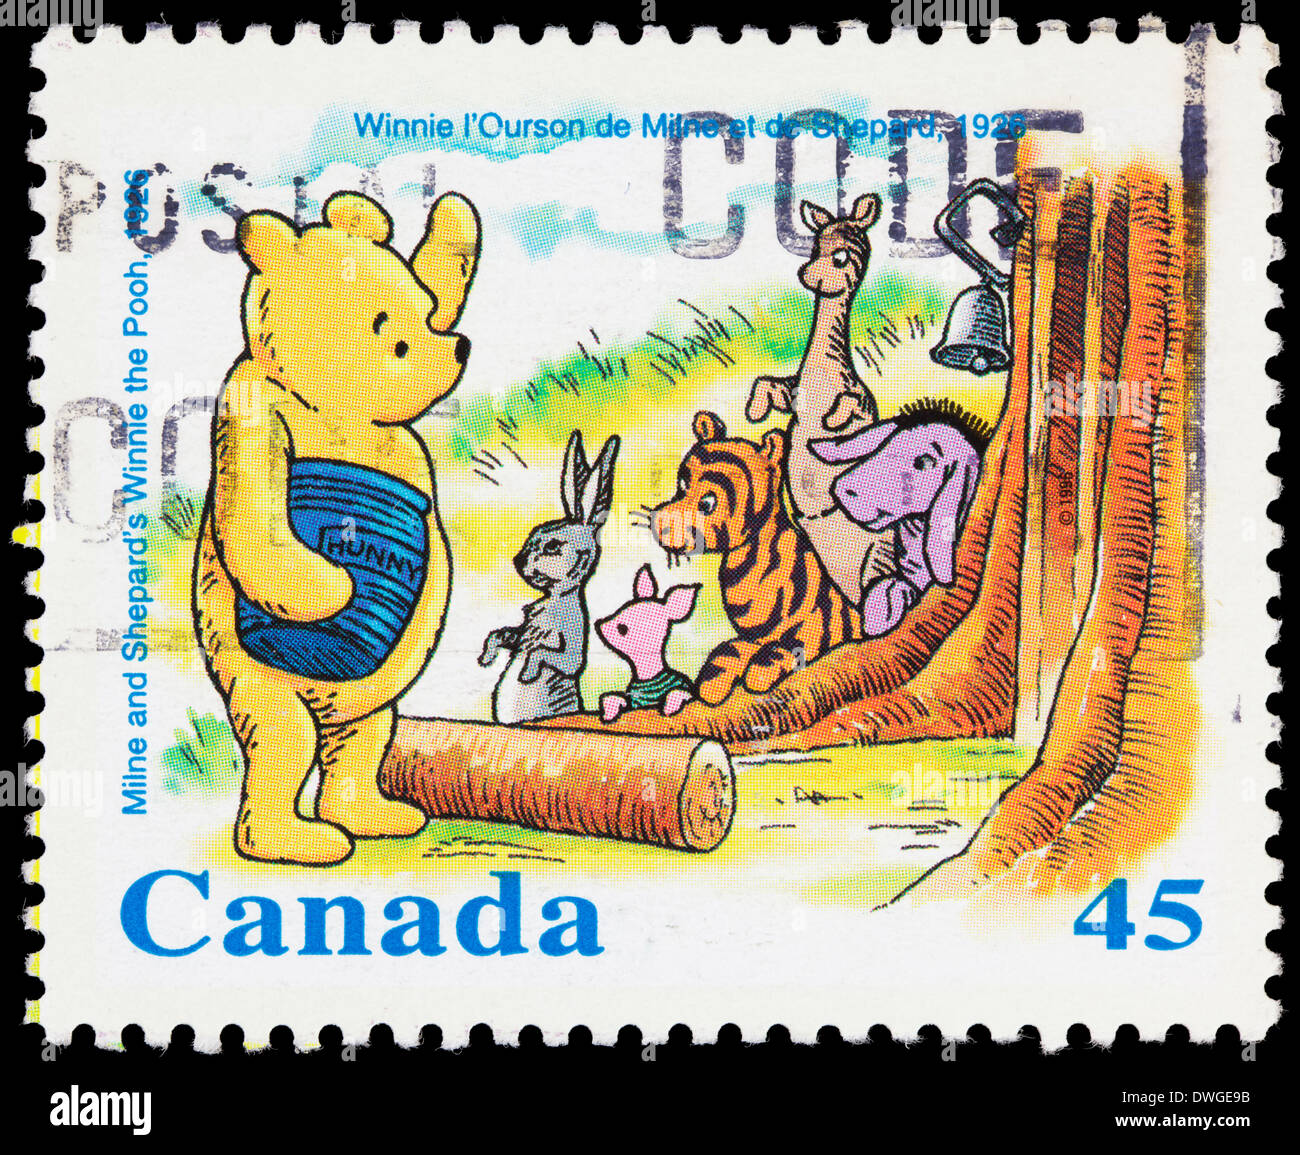 1996 Canada postage stamp with Winnie the Pooh as illustrated in the original 1926 children's book. Stock Photo